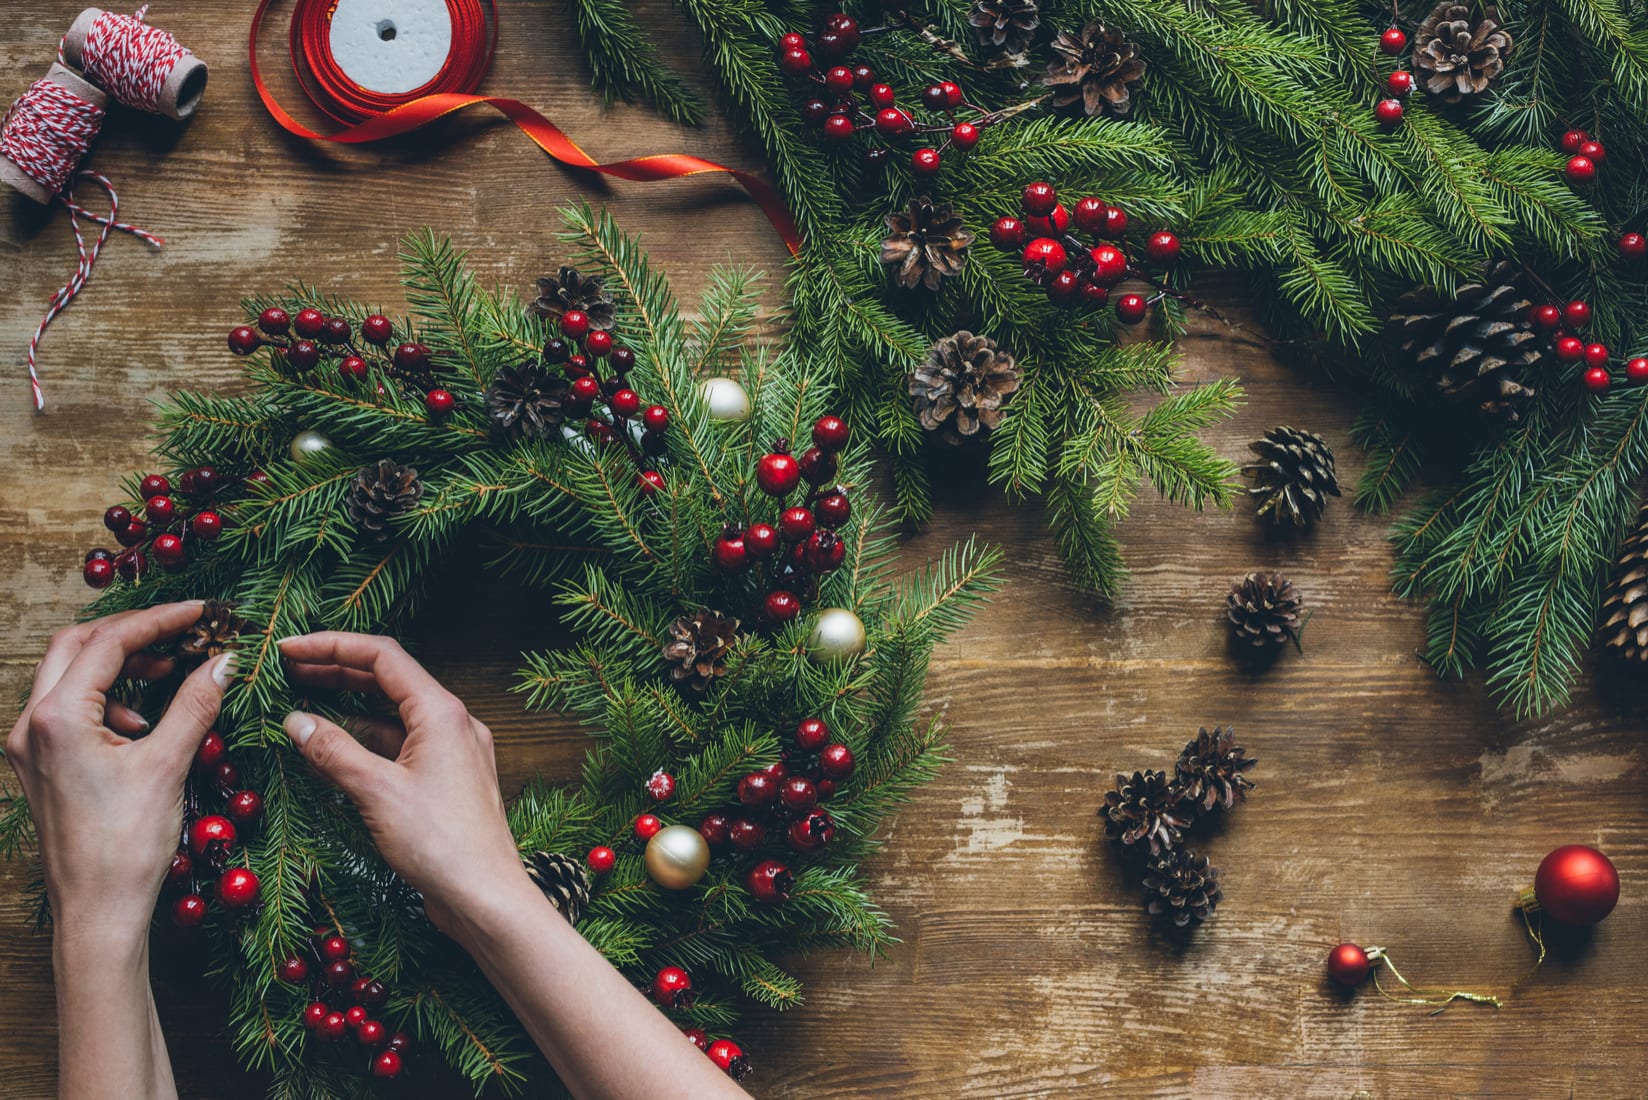 More Days Of Christmas: 5 Top Tips For Keeping Holiday Greenery Looking Fresh